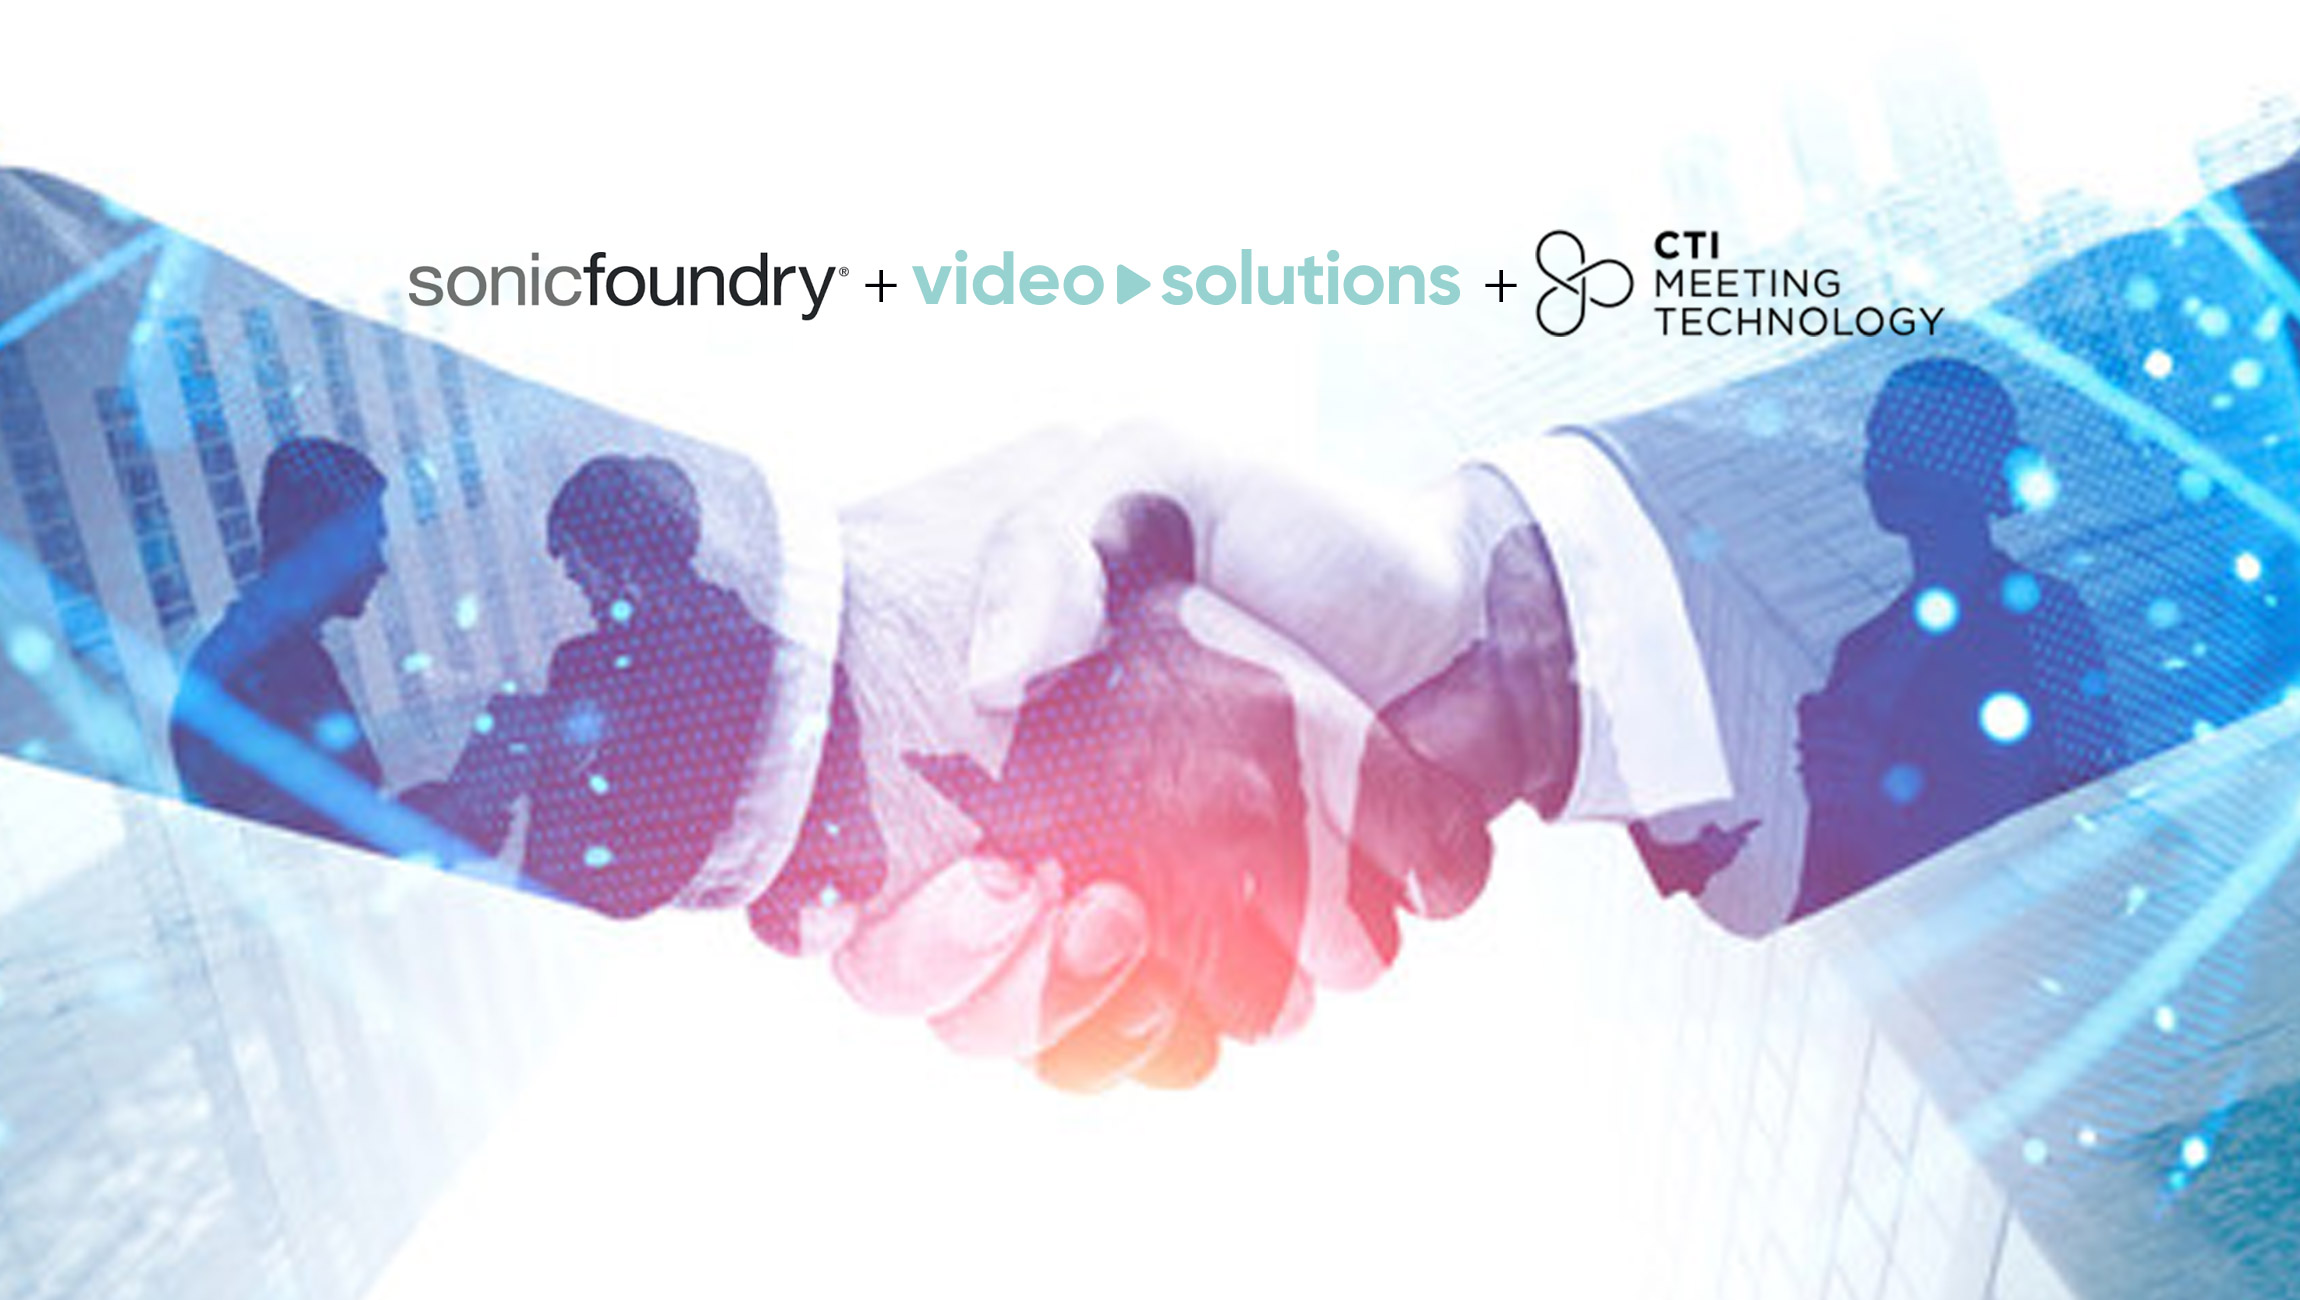 Sonic Foundry’s Video Solutions Group and CTI Meeting Technology Announce New Partnership to Provide Comprehensive Event Content Solutions